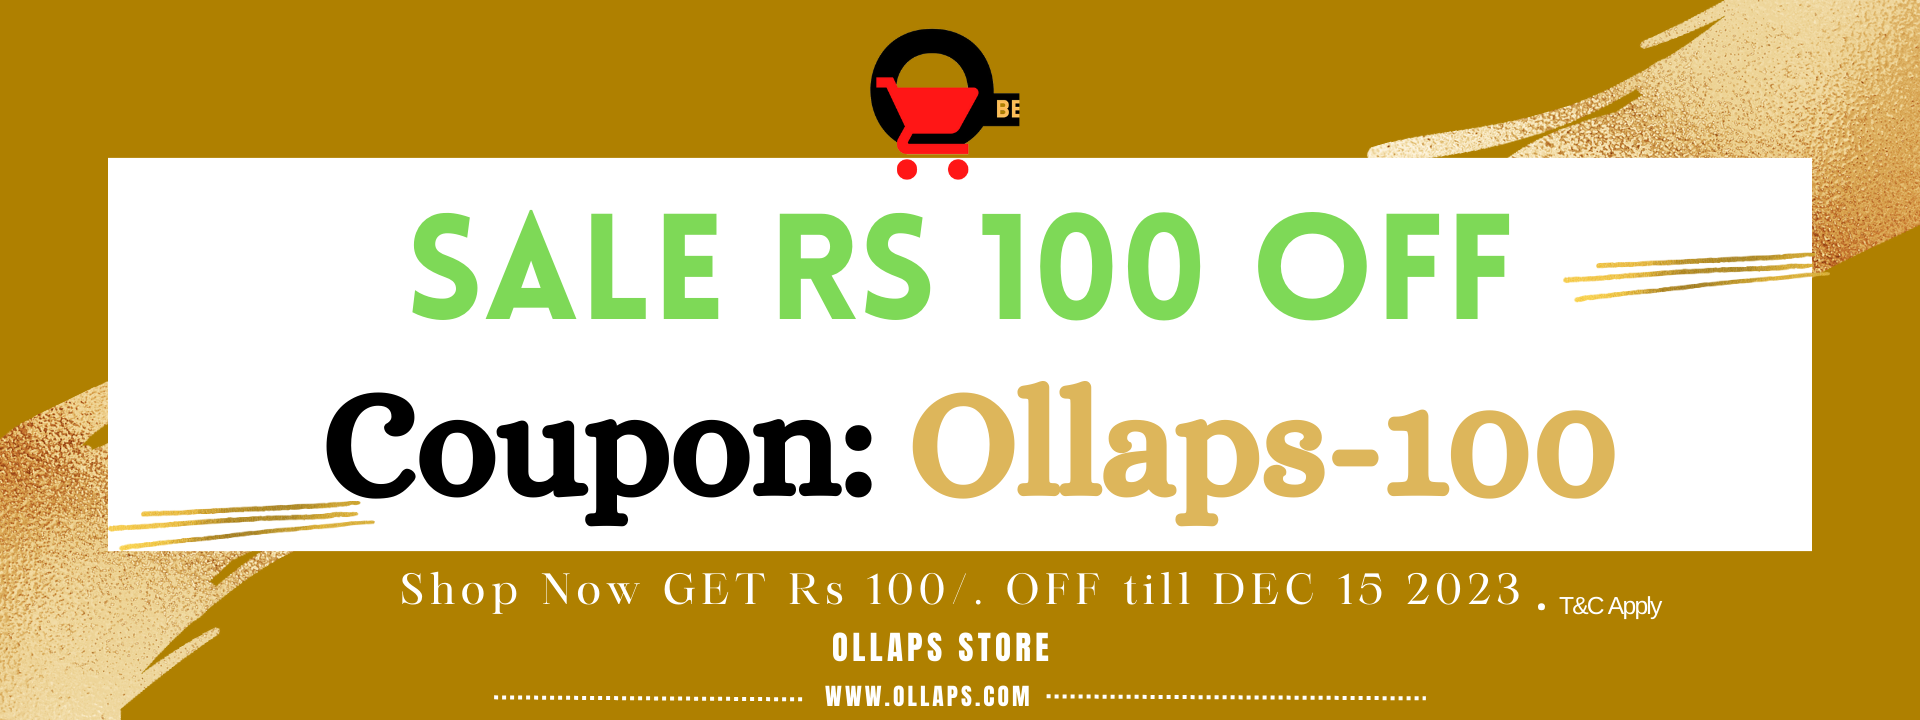 Get 100 RS OFF on your first Purchase on Ollaps.com till 15 of December 2023.